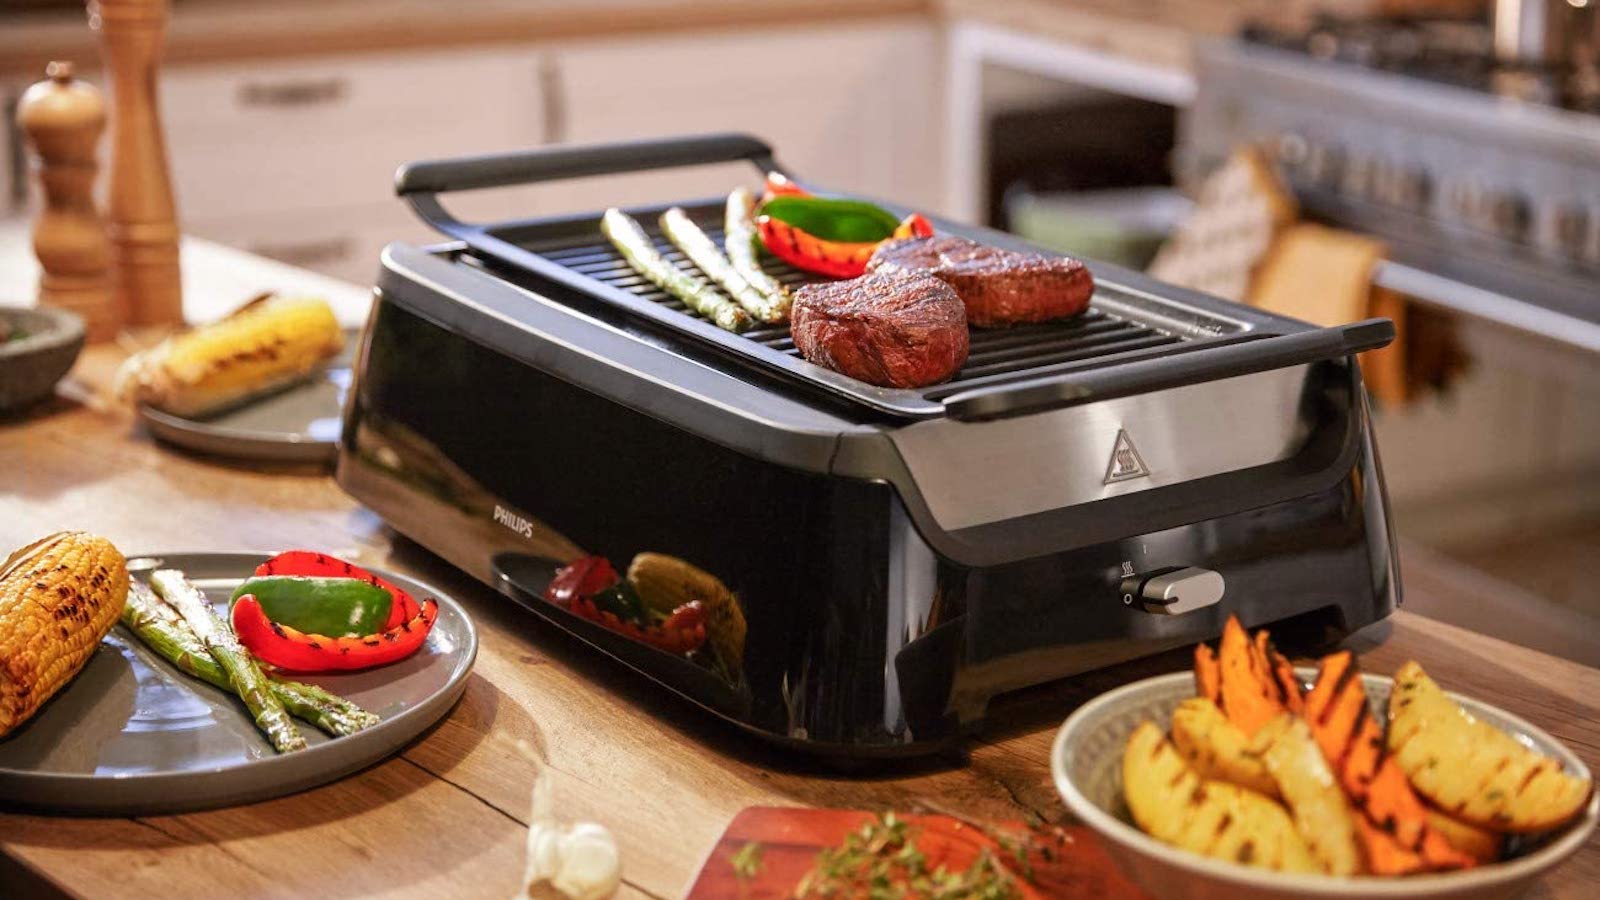 Udgangspunktet Udgående Rejse Philips Smoke-less Grill with rotisserie attachment indoor BBQ reduces  splashes & spatters » Gadget Flow